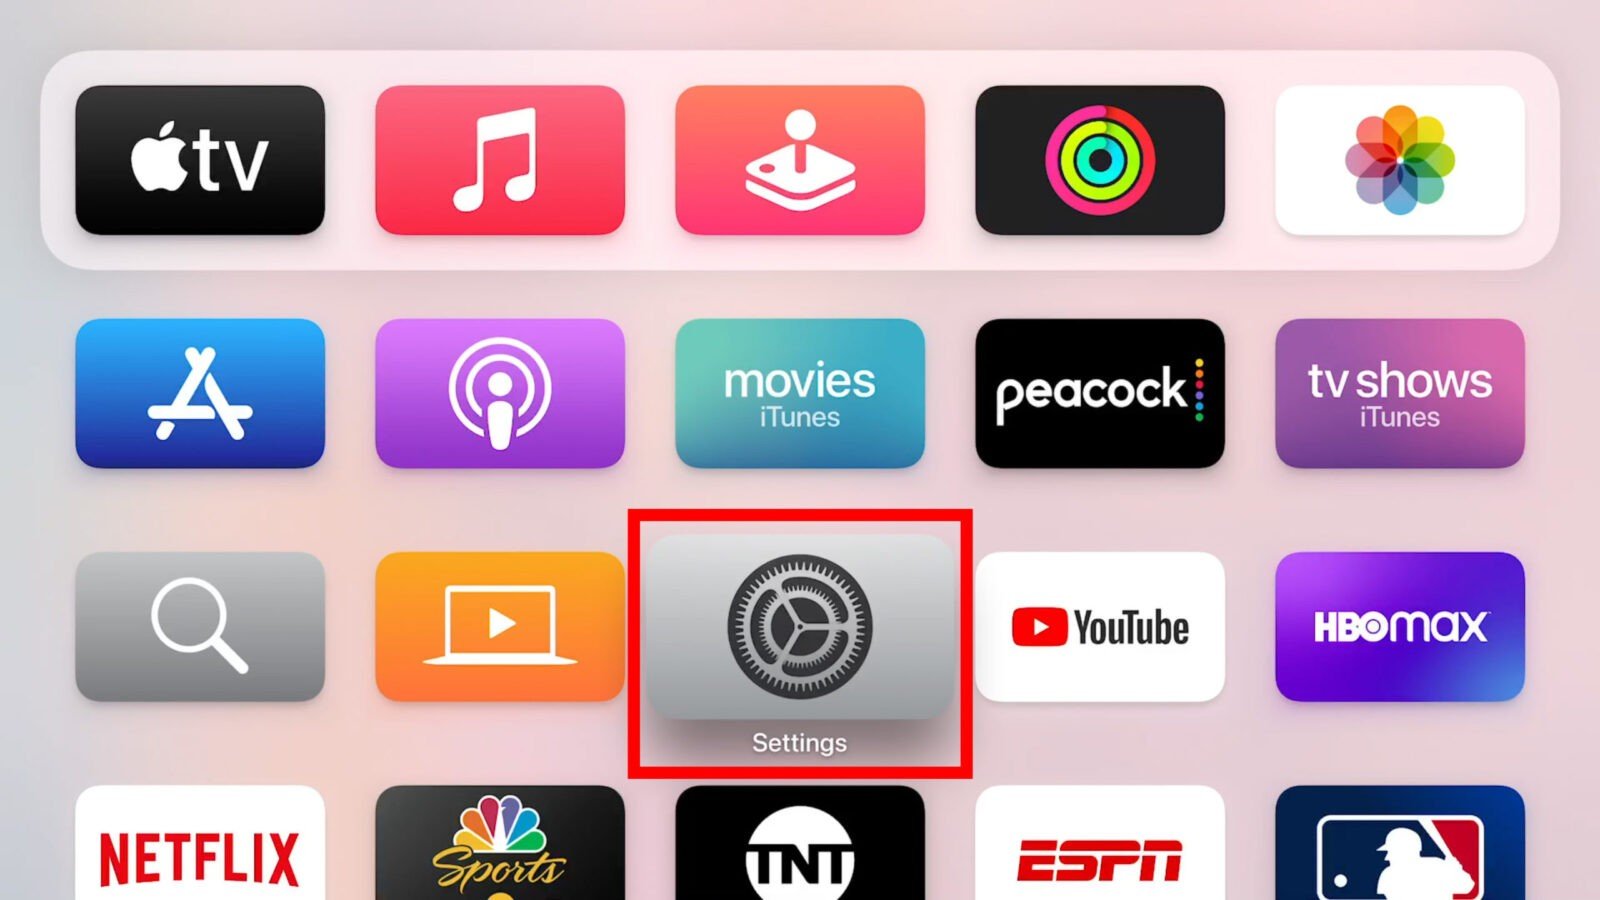 how to download sling tv on apple tv 1st generation